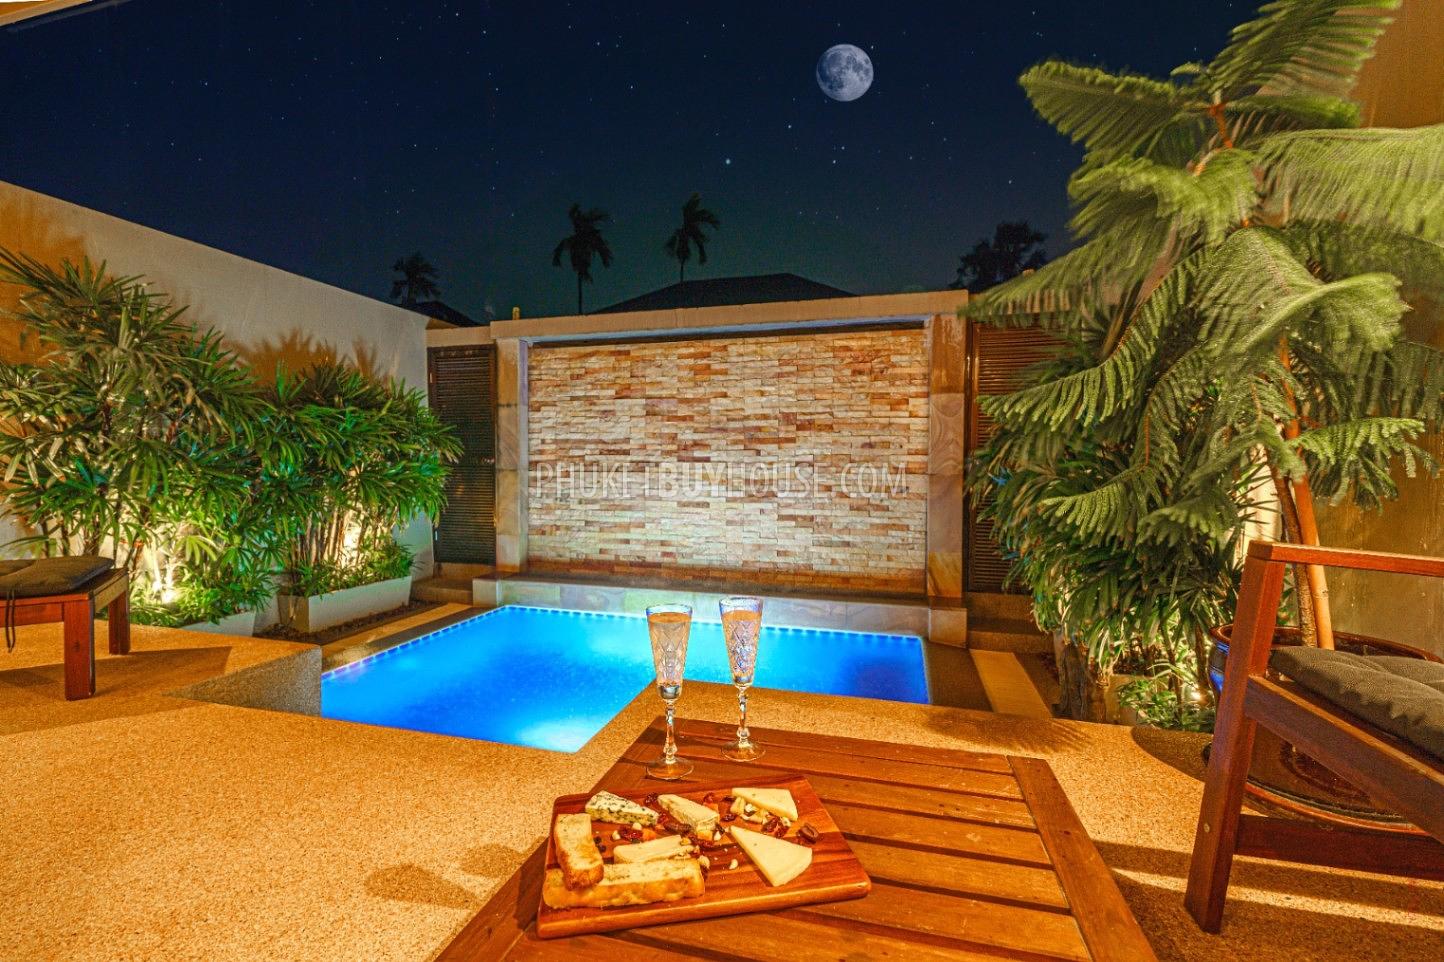 BAN22085: One bedroom villa with private pool on Bangtao beach. Photo #2